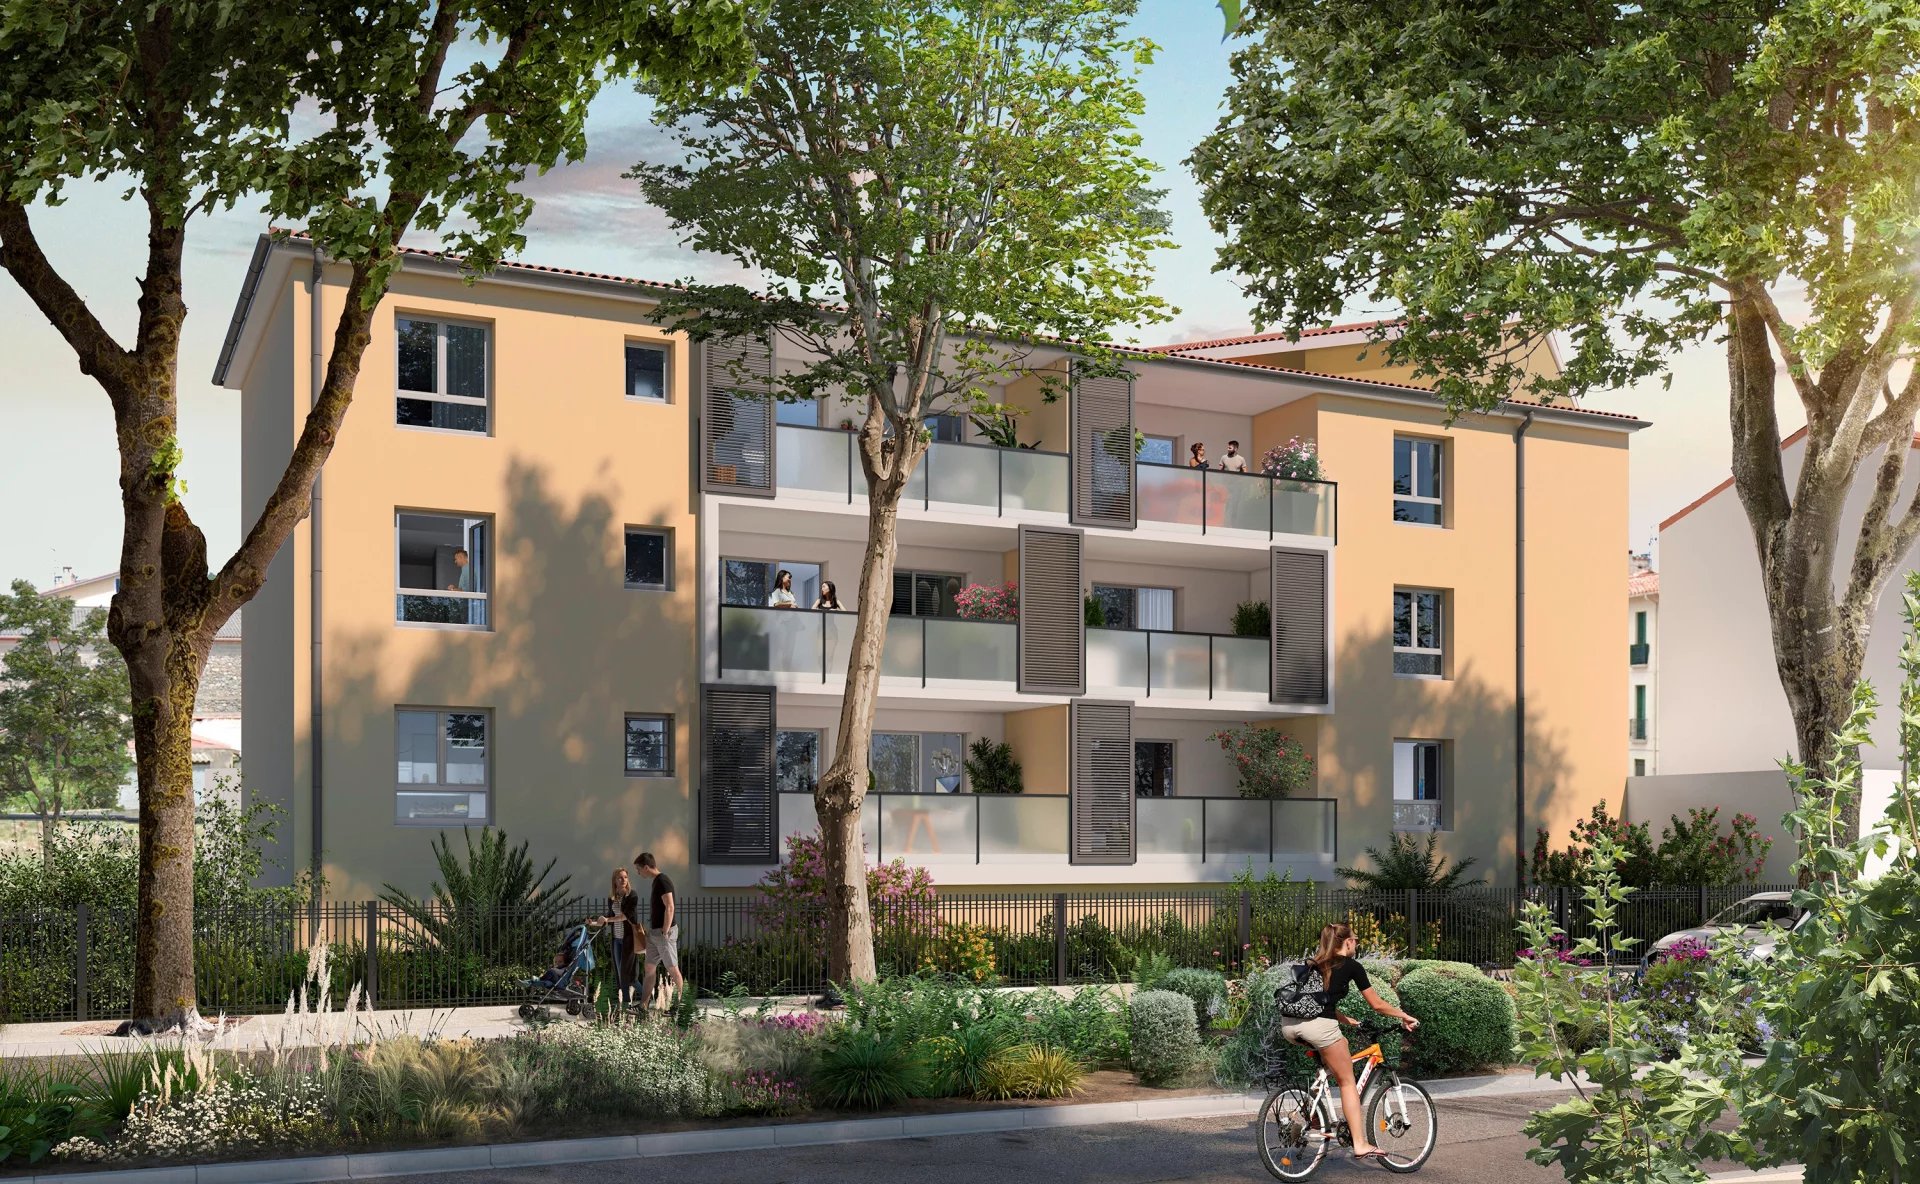 OFF-PLAN 2-BED APPARTMENT (LOT 102), RESIDENCE L'ANGLE DES ARTS, CERET